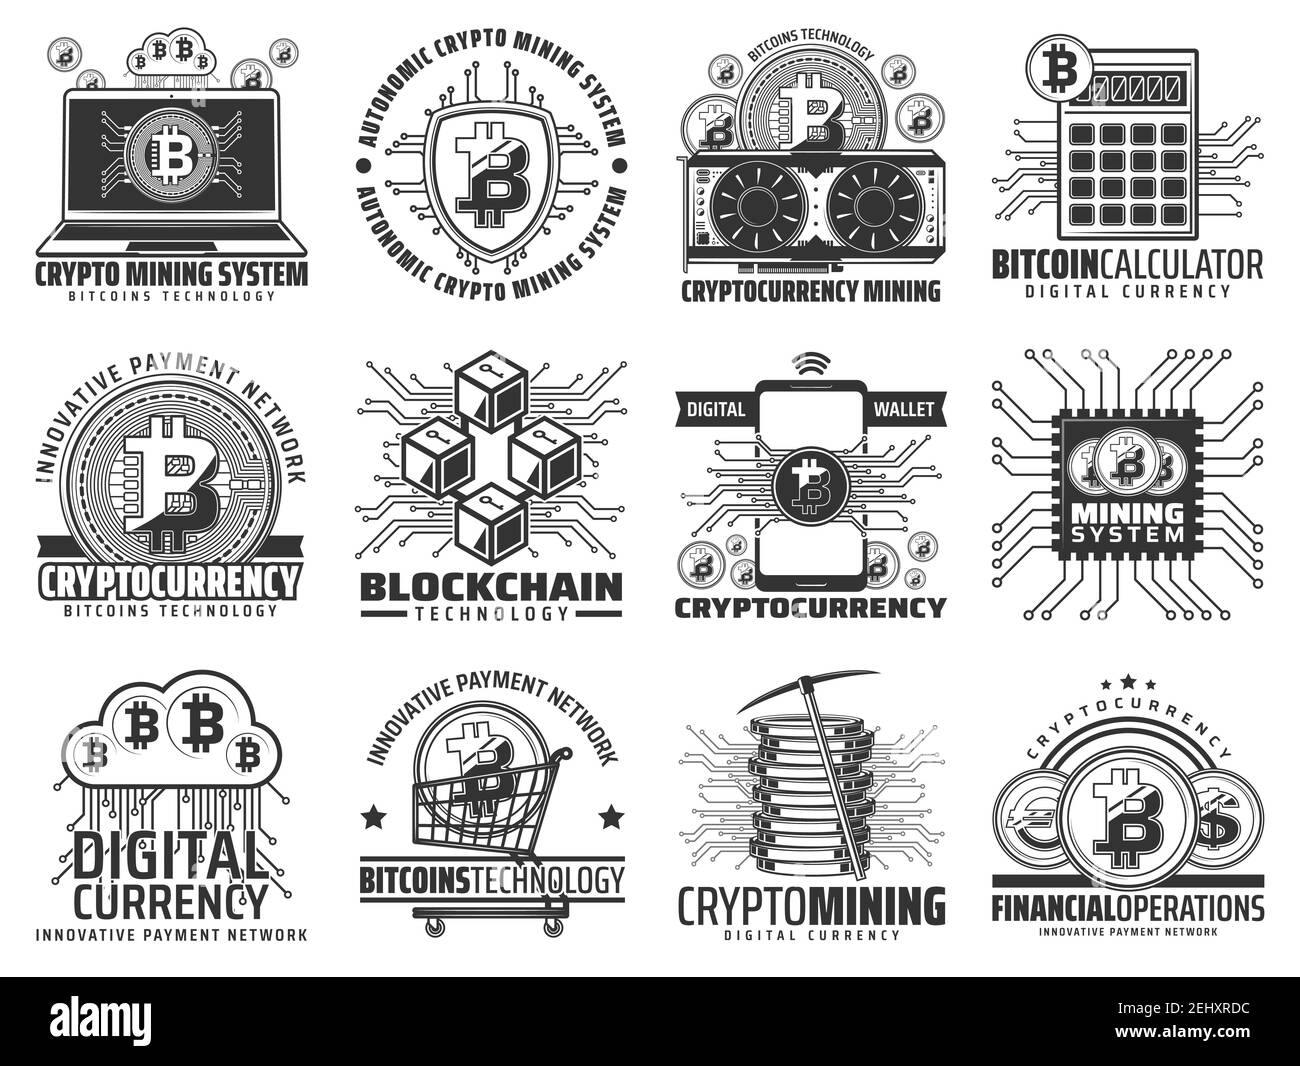 Pi network coin Cut Out Stock Images & Pictures - Alamy